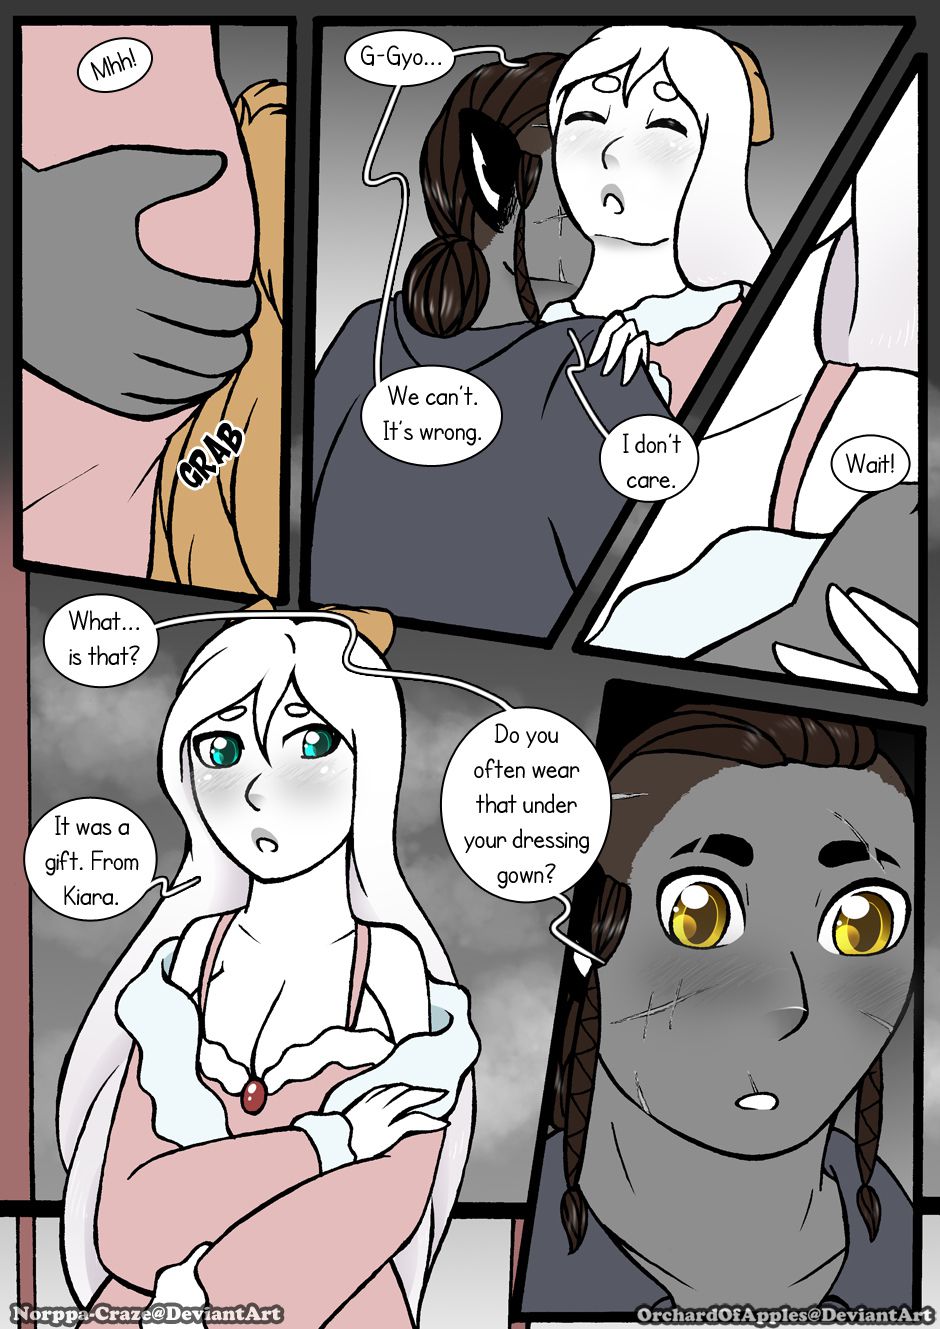 [Jeny-jen94] Between Kings and Queens [Ongoing] 345